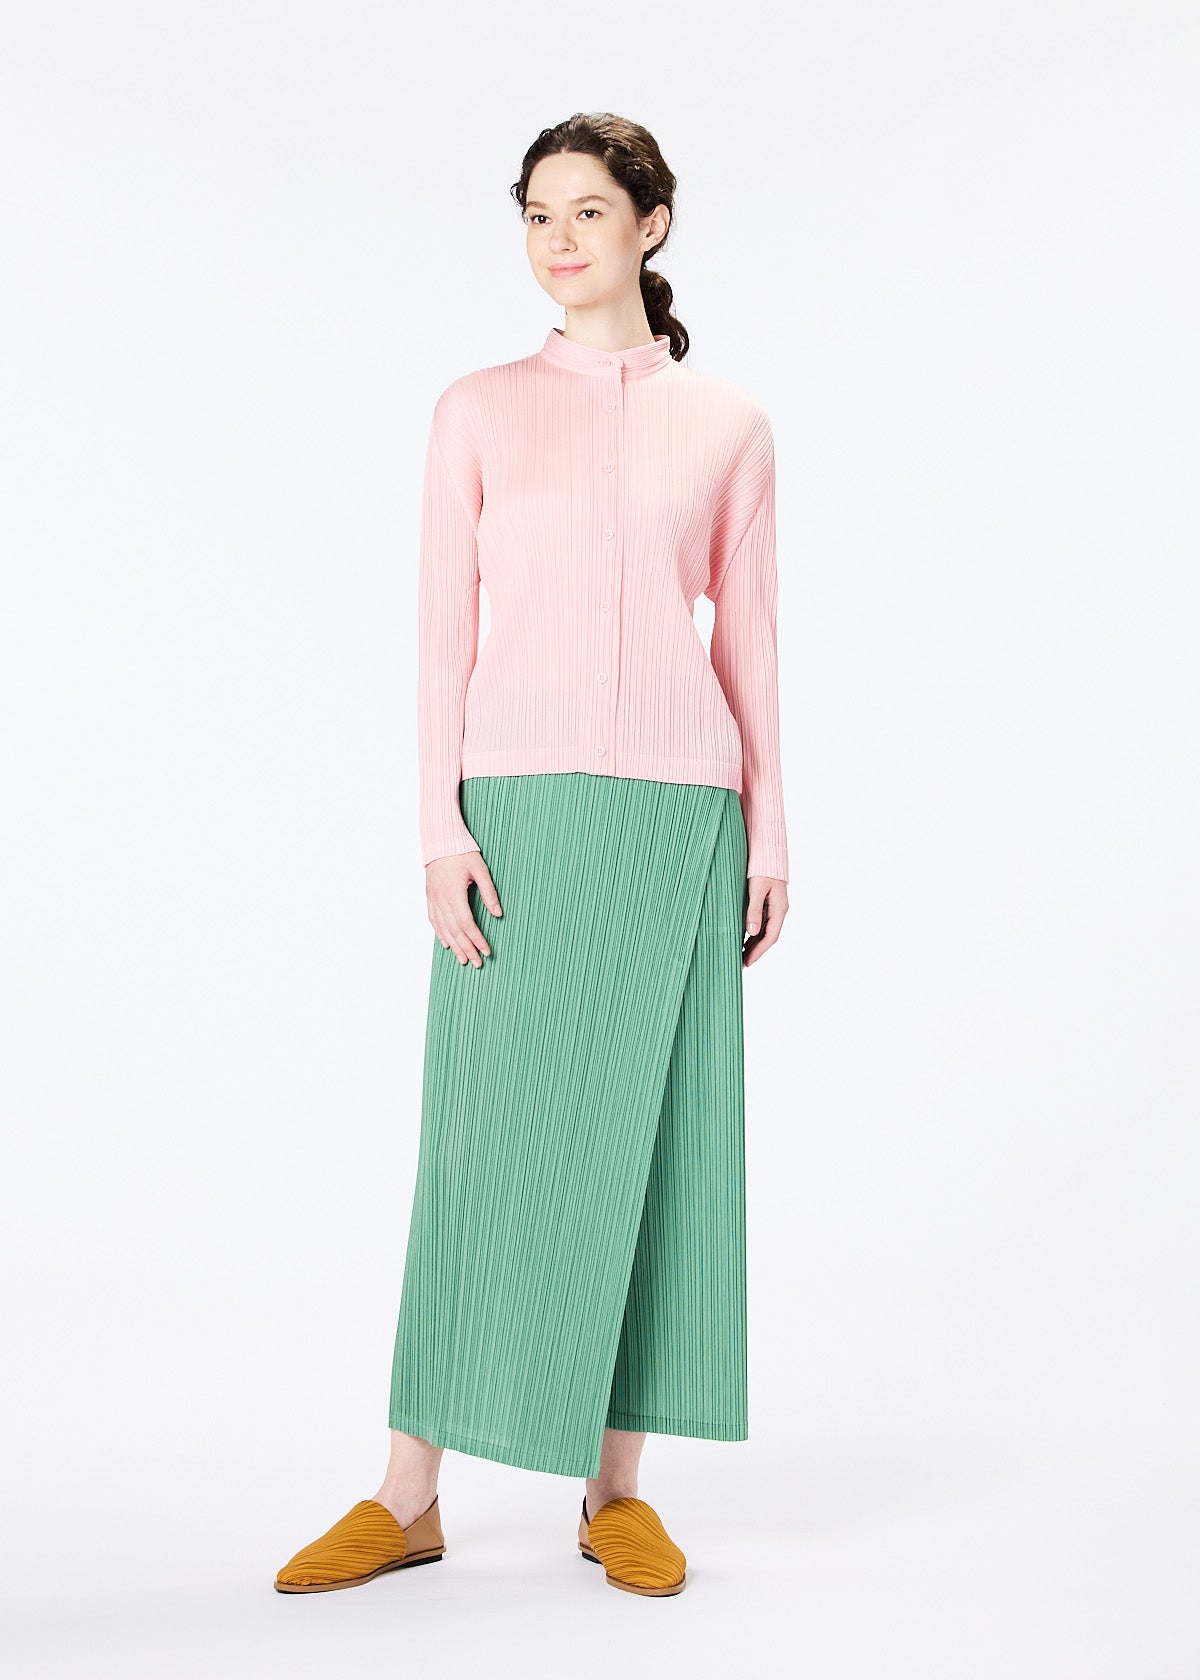 MONTHLY COLORS : FEBRUARY PANTS | The official ISSEY MIYAKE ONLINE